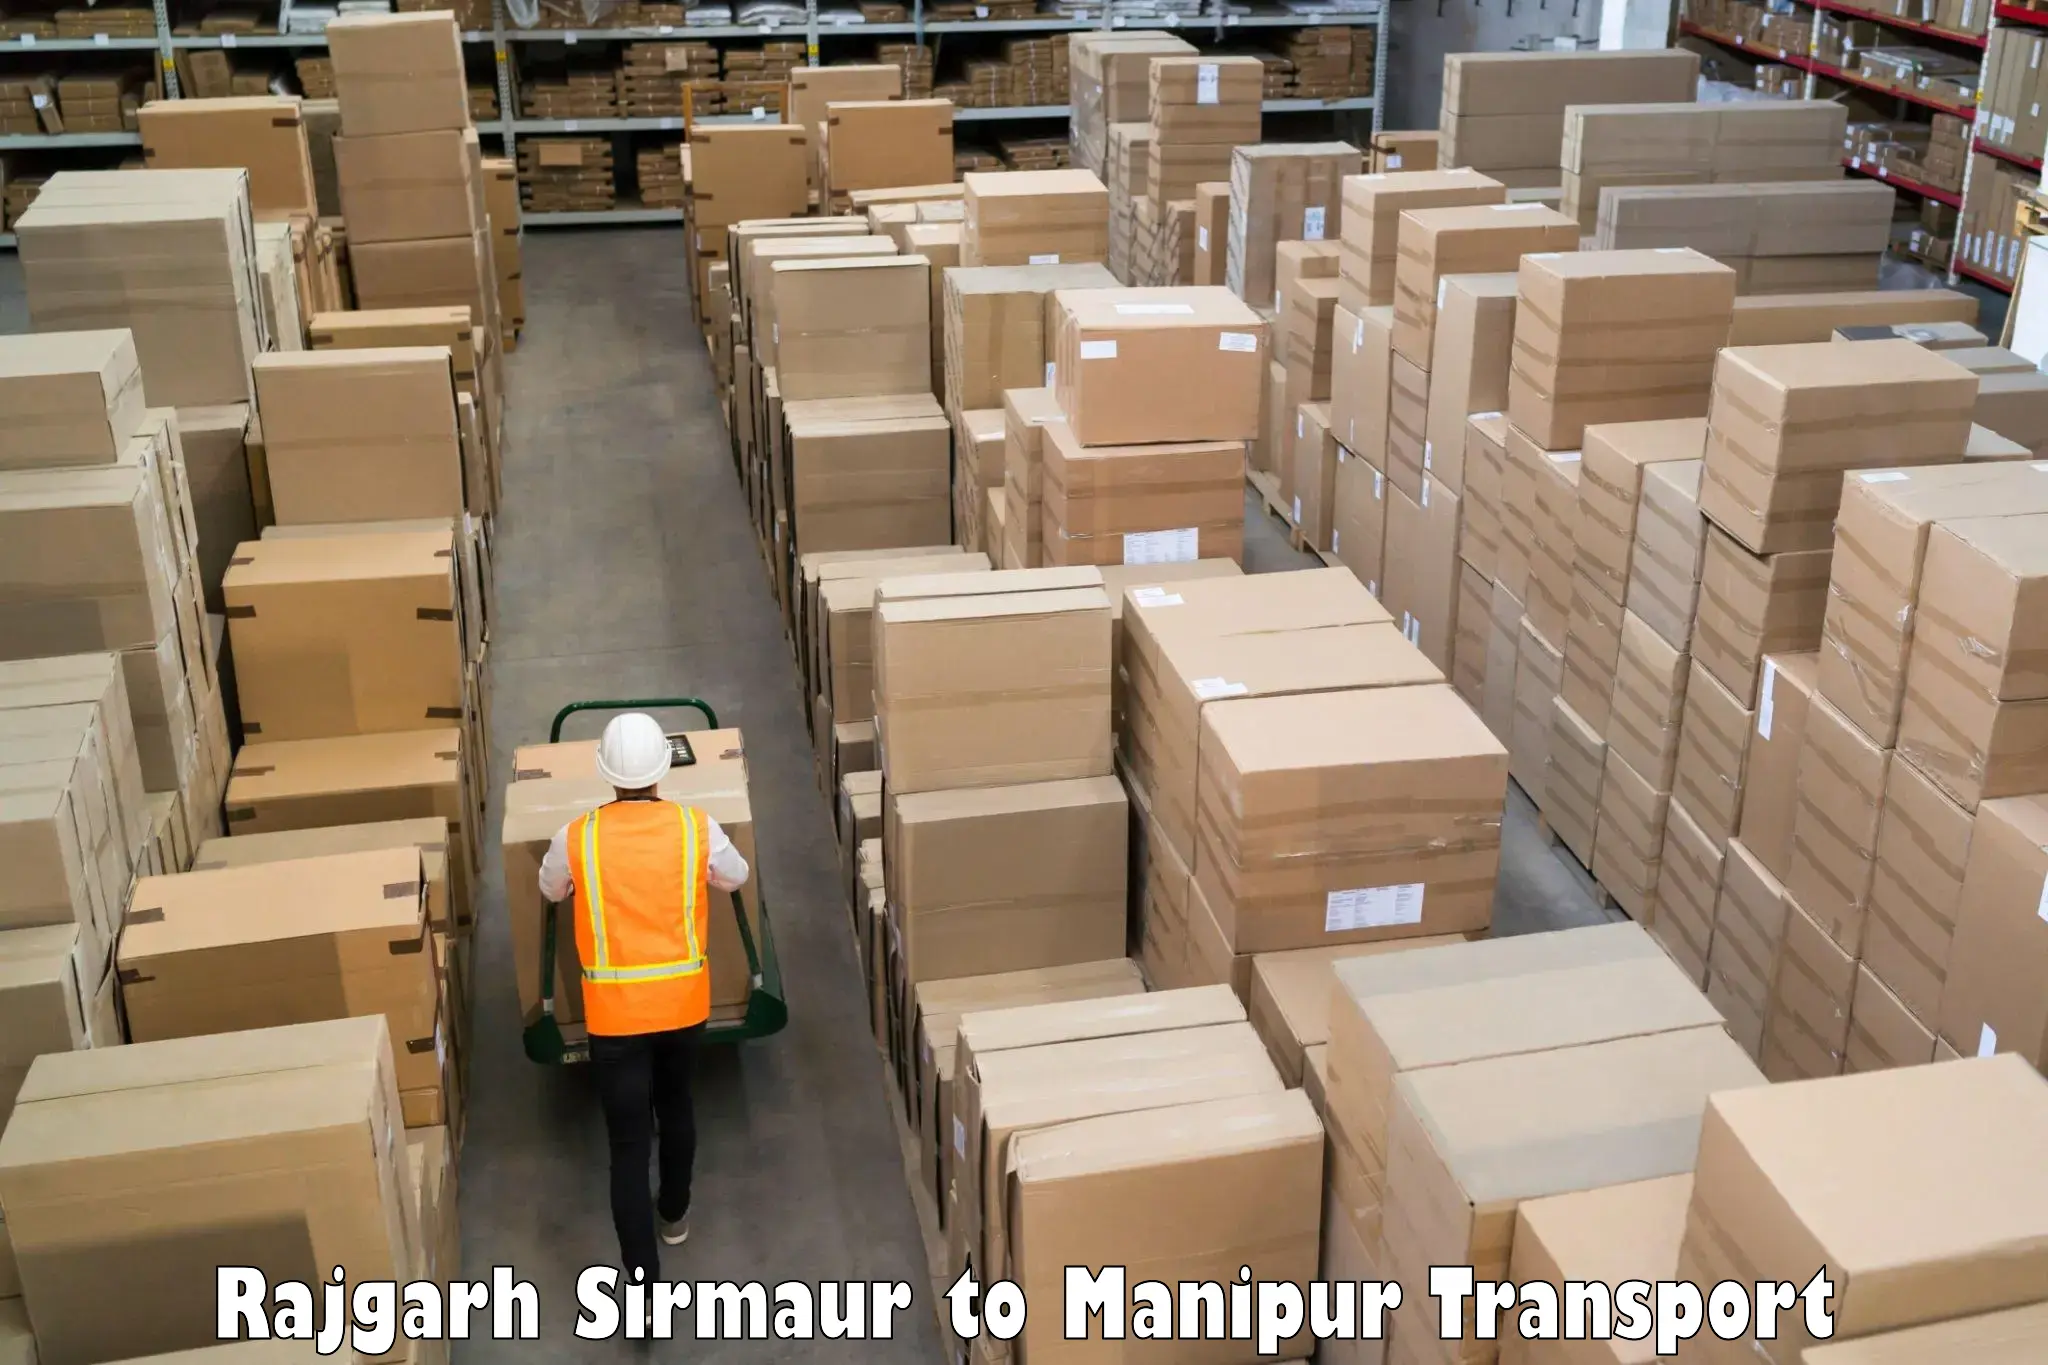 Commercial transport service Rajgarh Sirmaur to Manipur